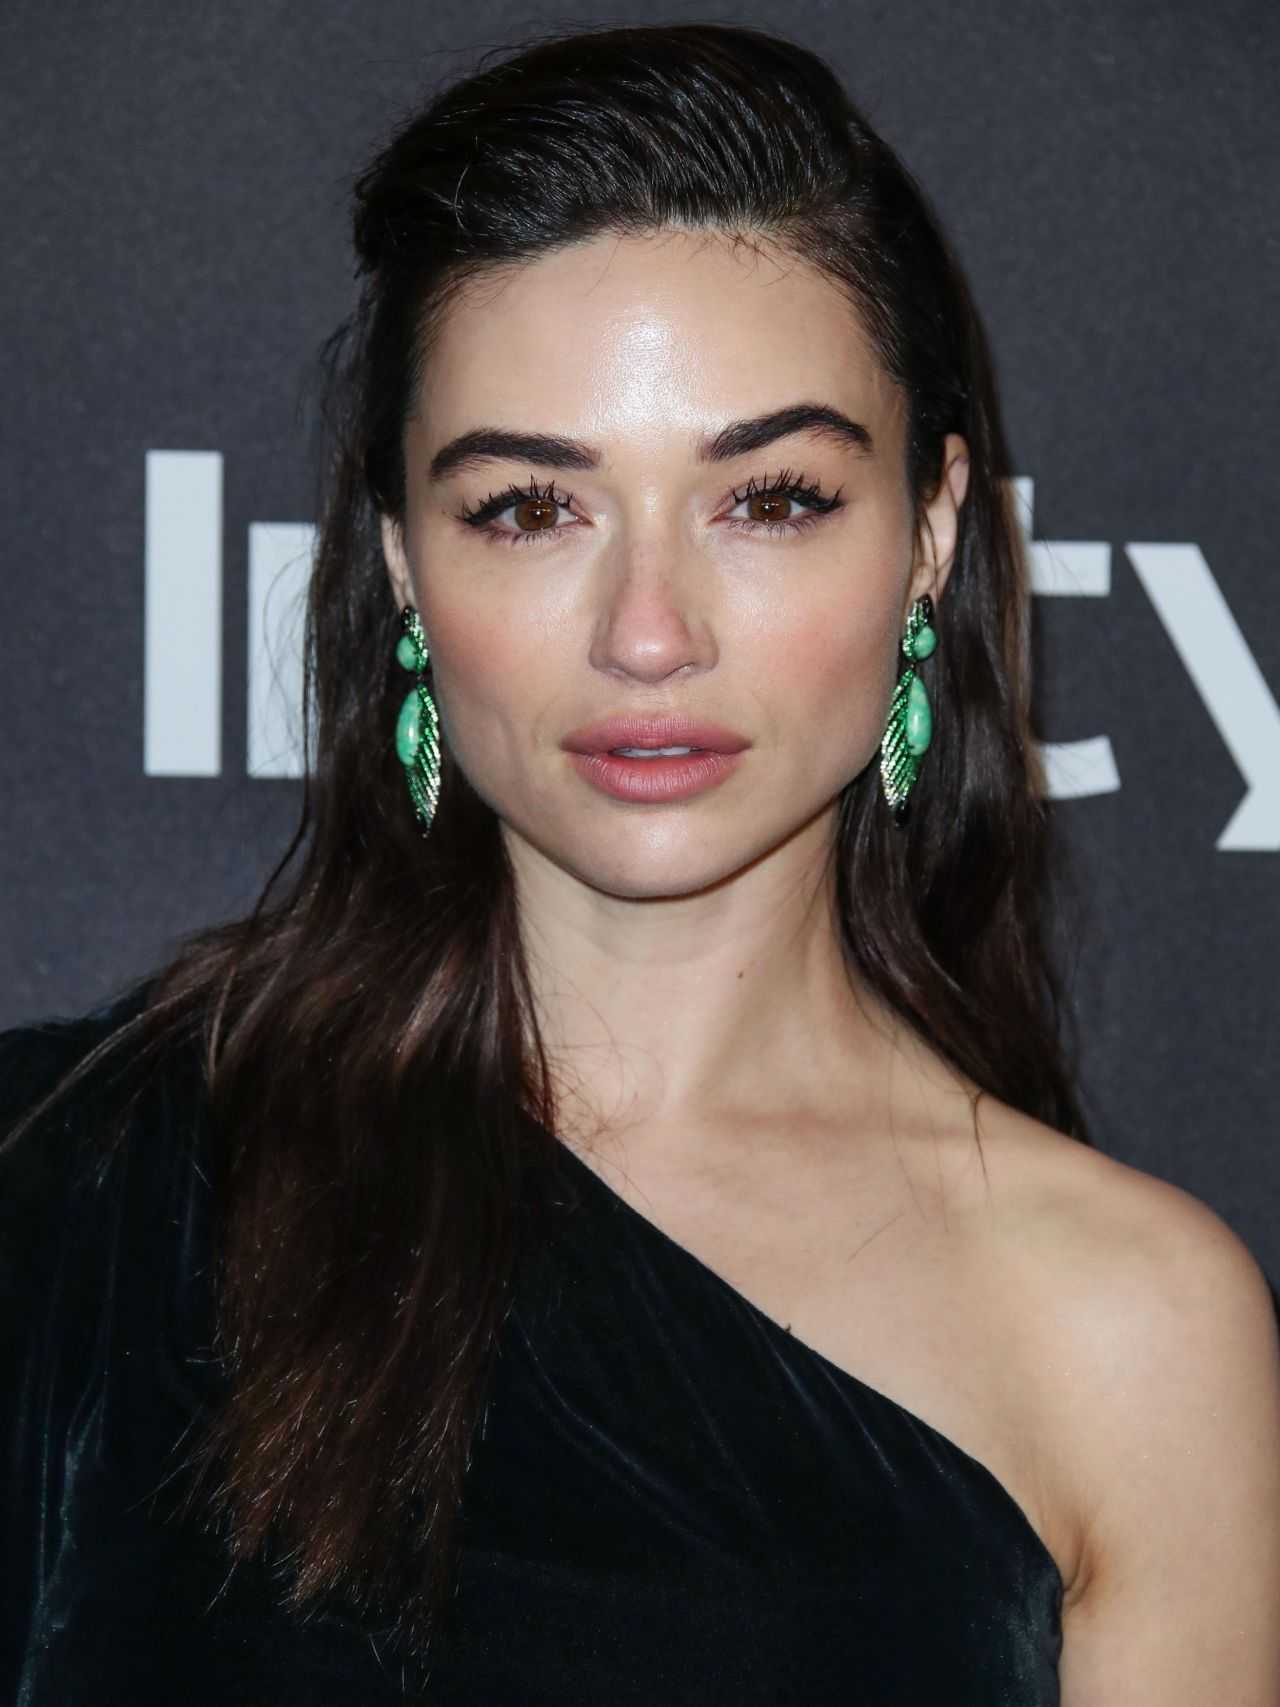 70+ Hot Pictures Of Crystal Reed That Are Sure To Make You Her Biggest Fan 8